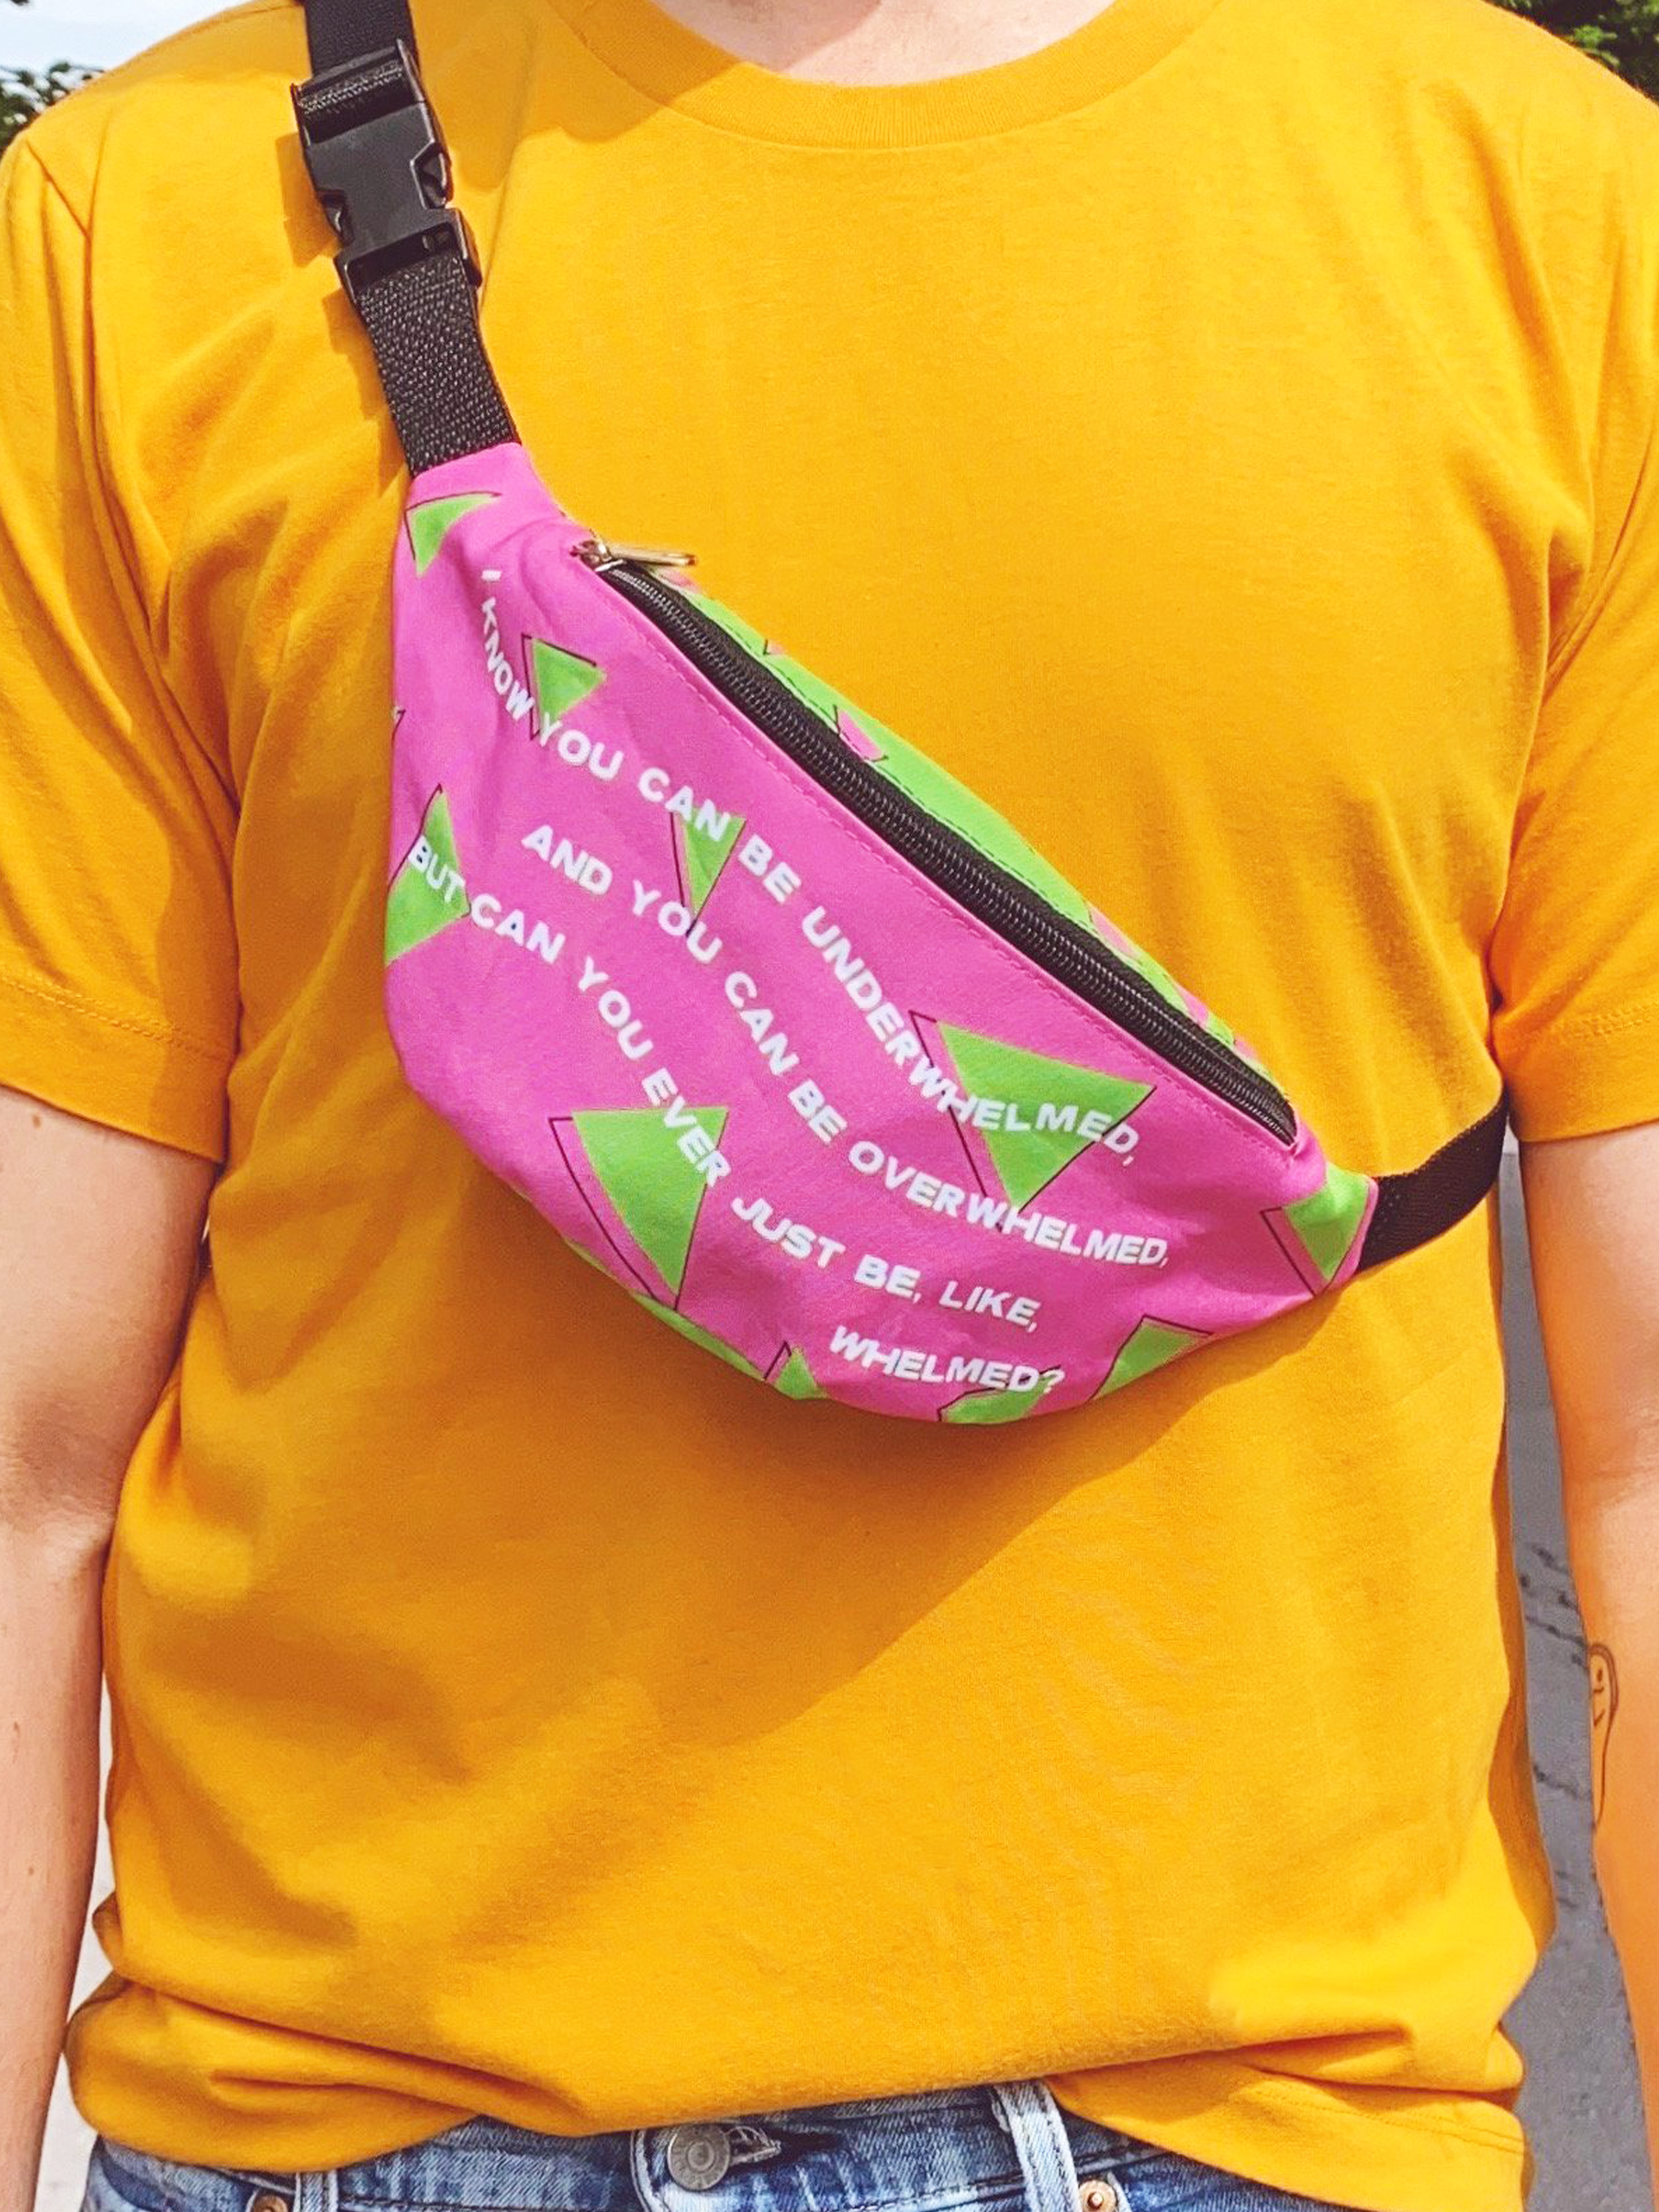 Just Don't Call It a Fanny Pack